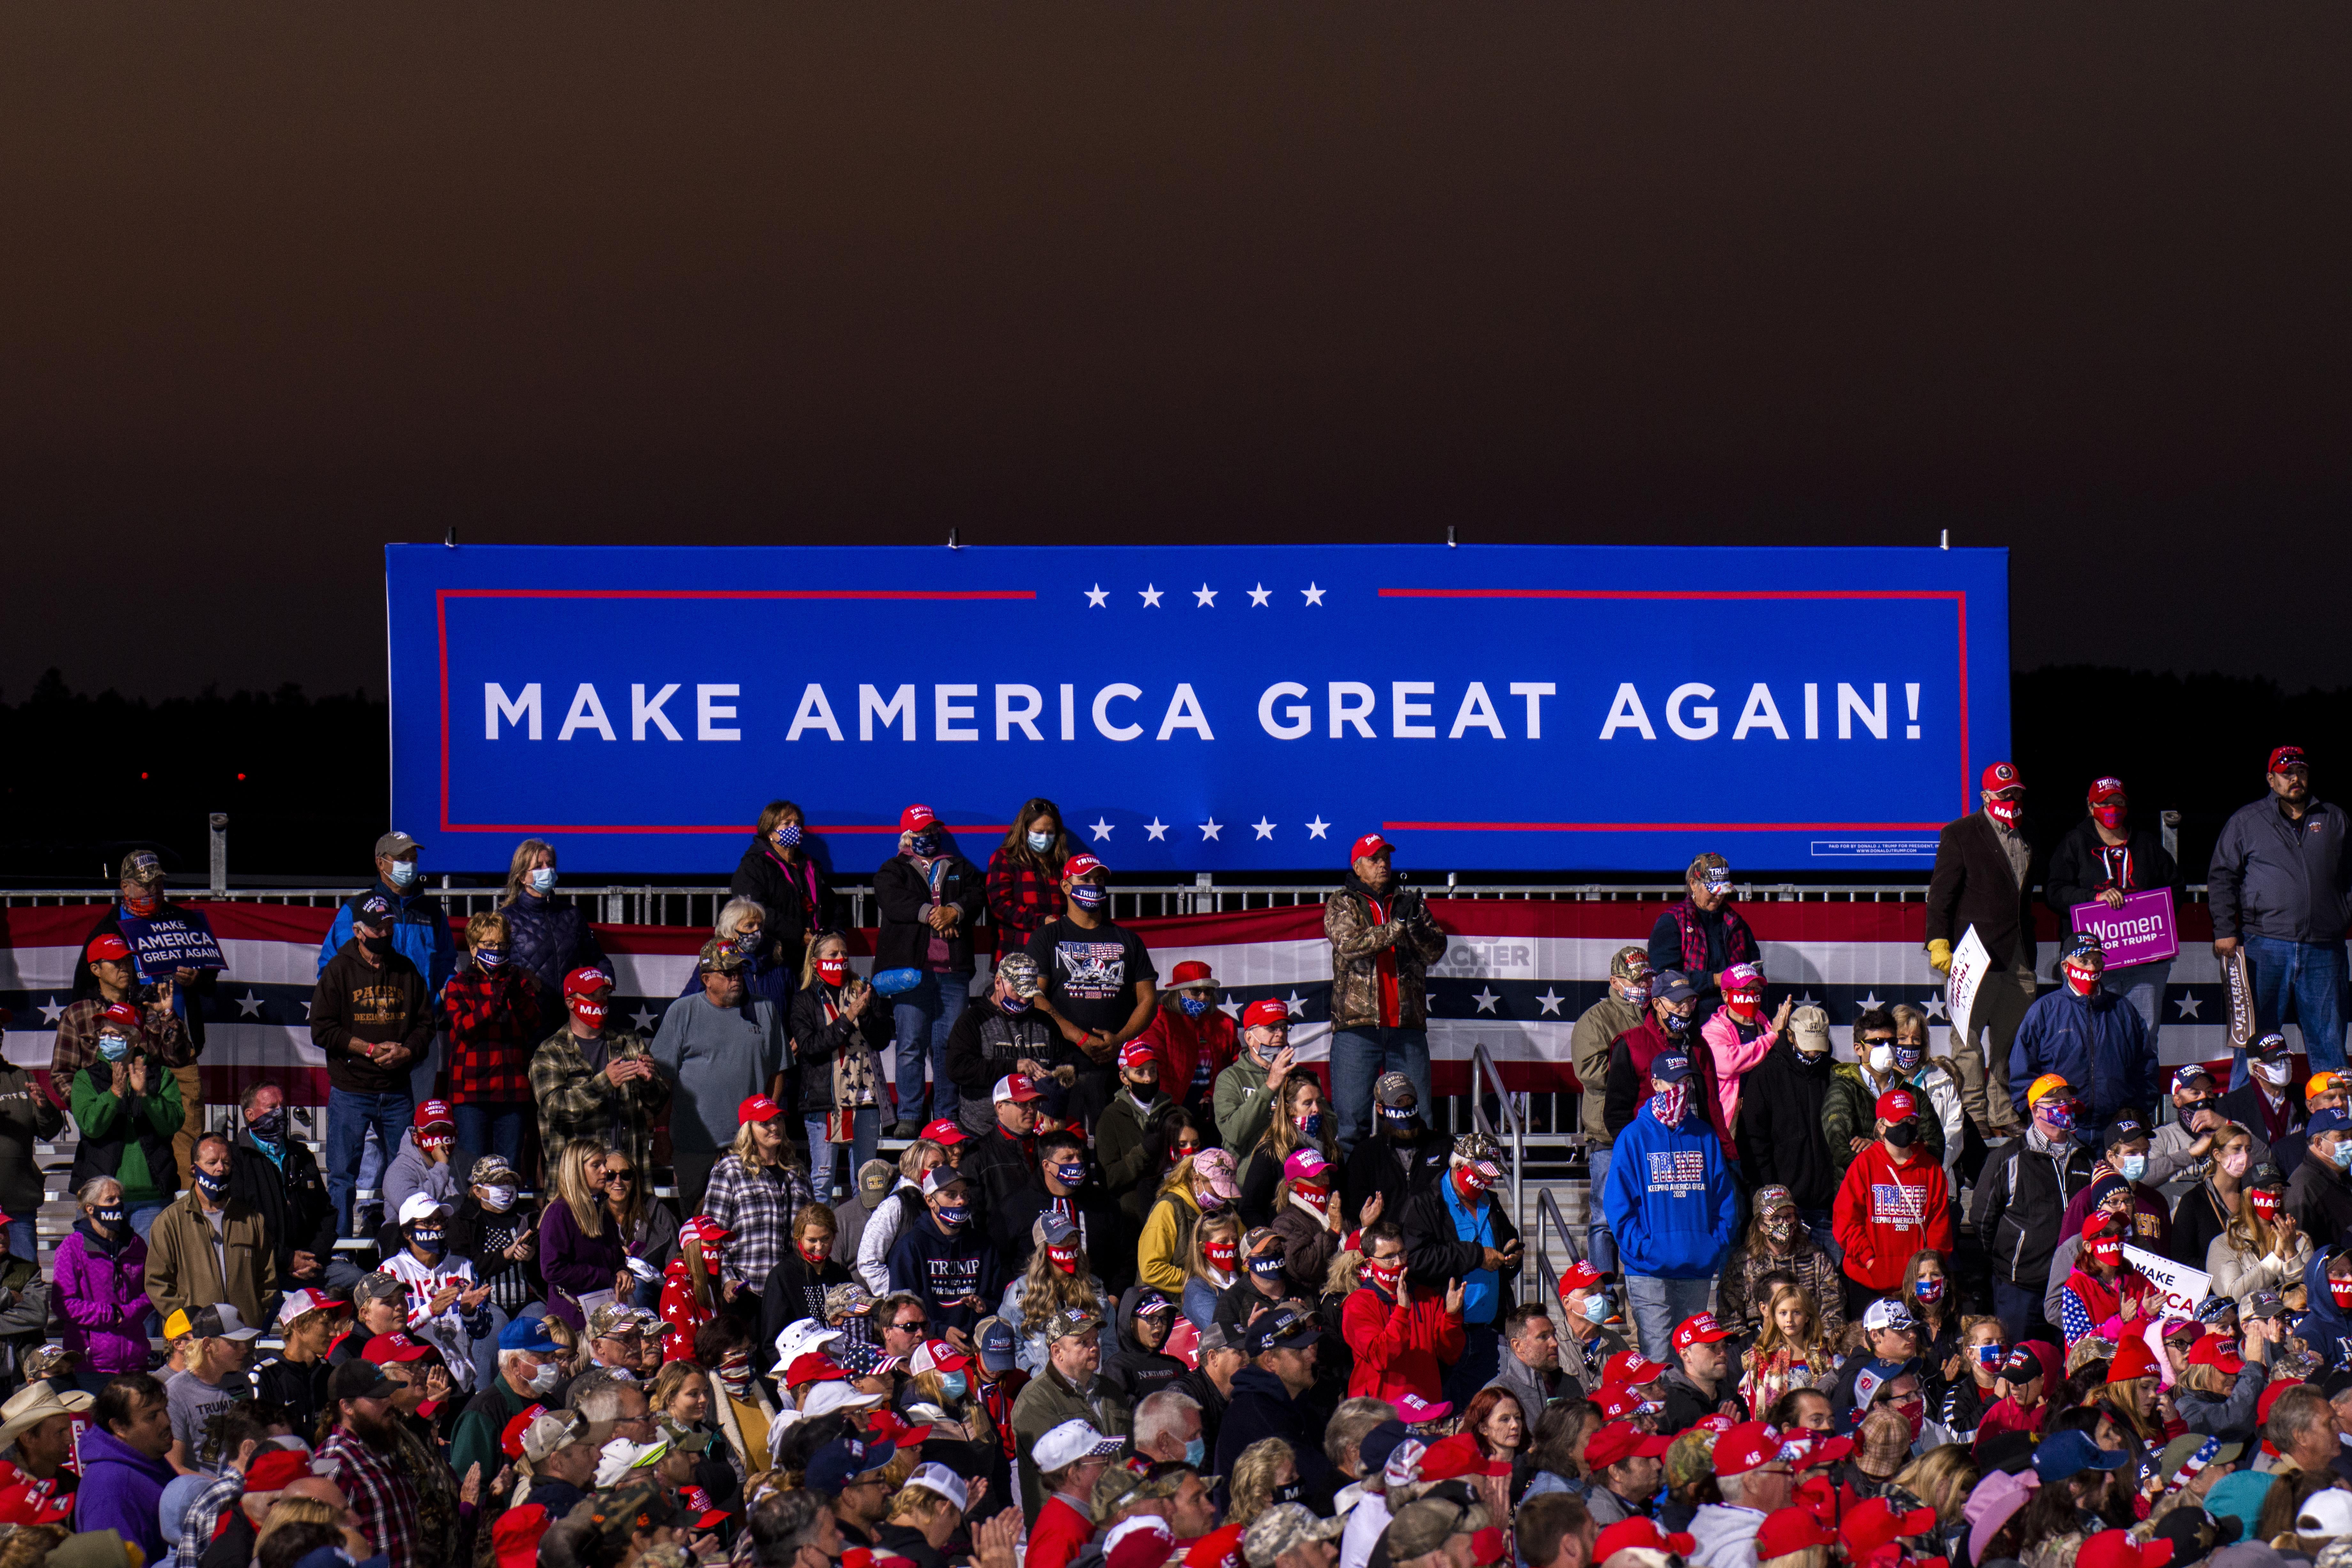 Rows of people, many wearing red caps, sit or stand below a long "Make America Great Again!" sign.